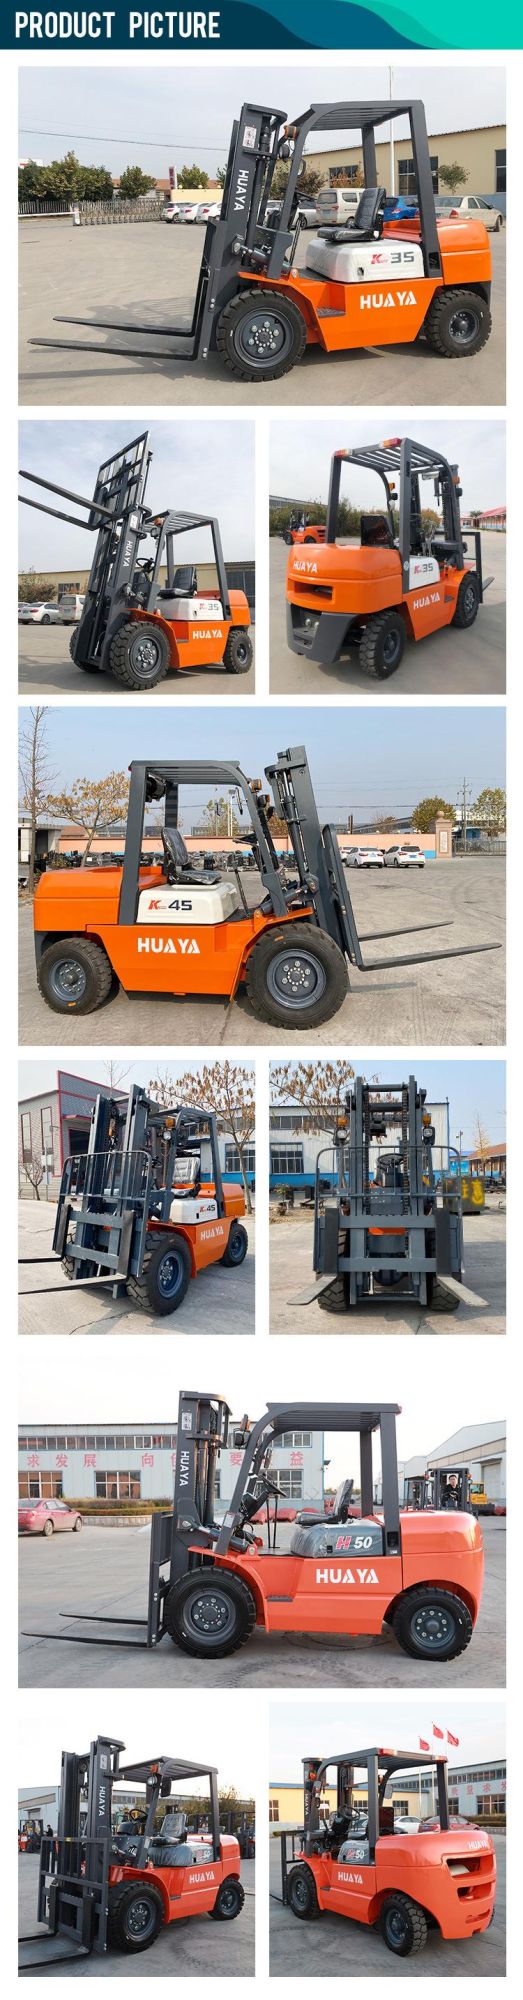 Factory Price Huaya New China Brands 2.5 3 Ton Hydraulic Forklift Fd25